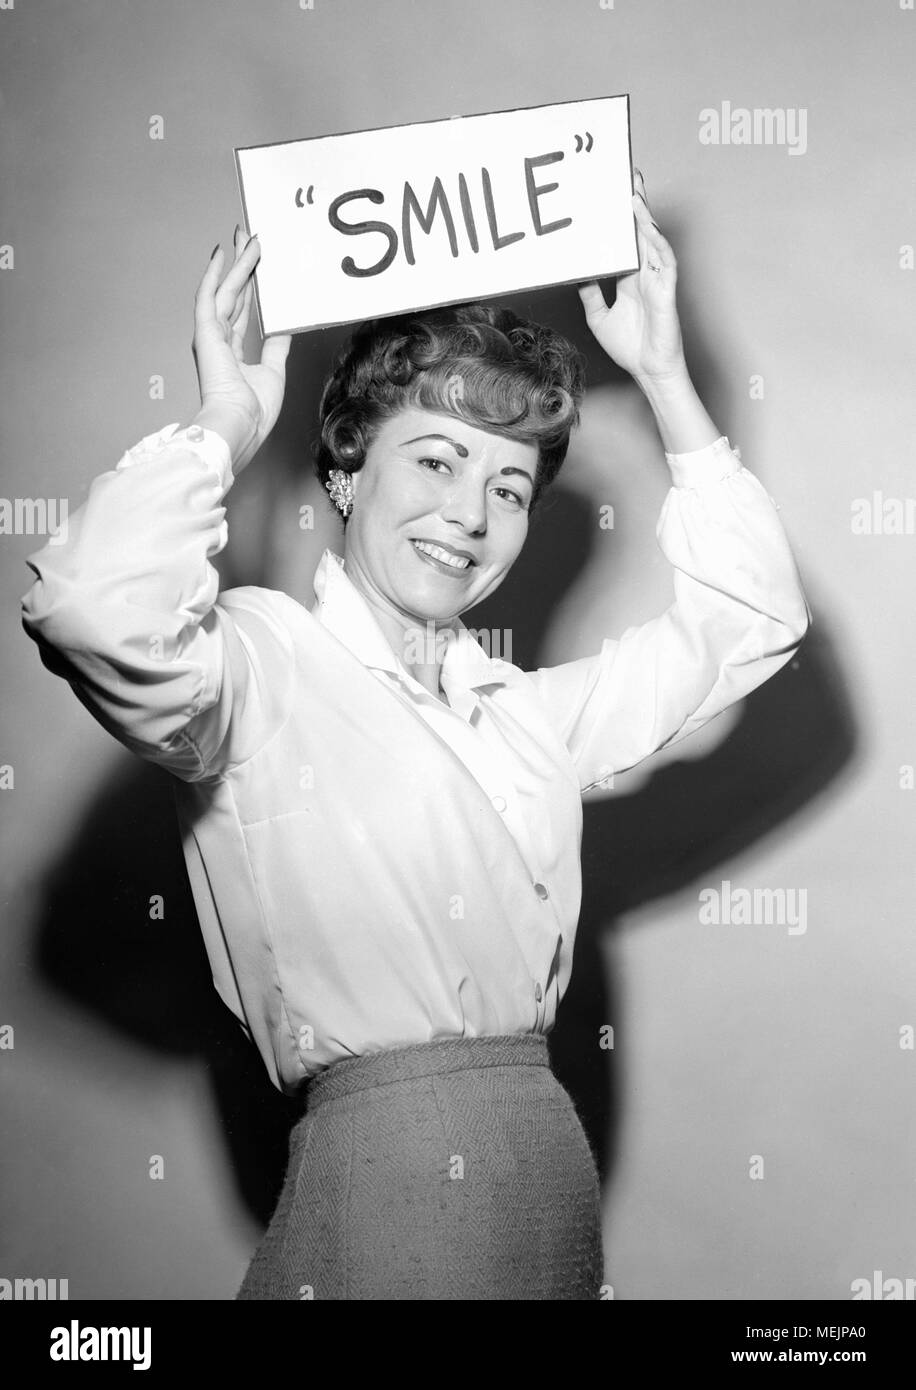 A well-made up 50s woman implores her audience to smile, ca. 1957. Stock Photo